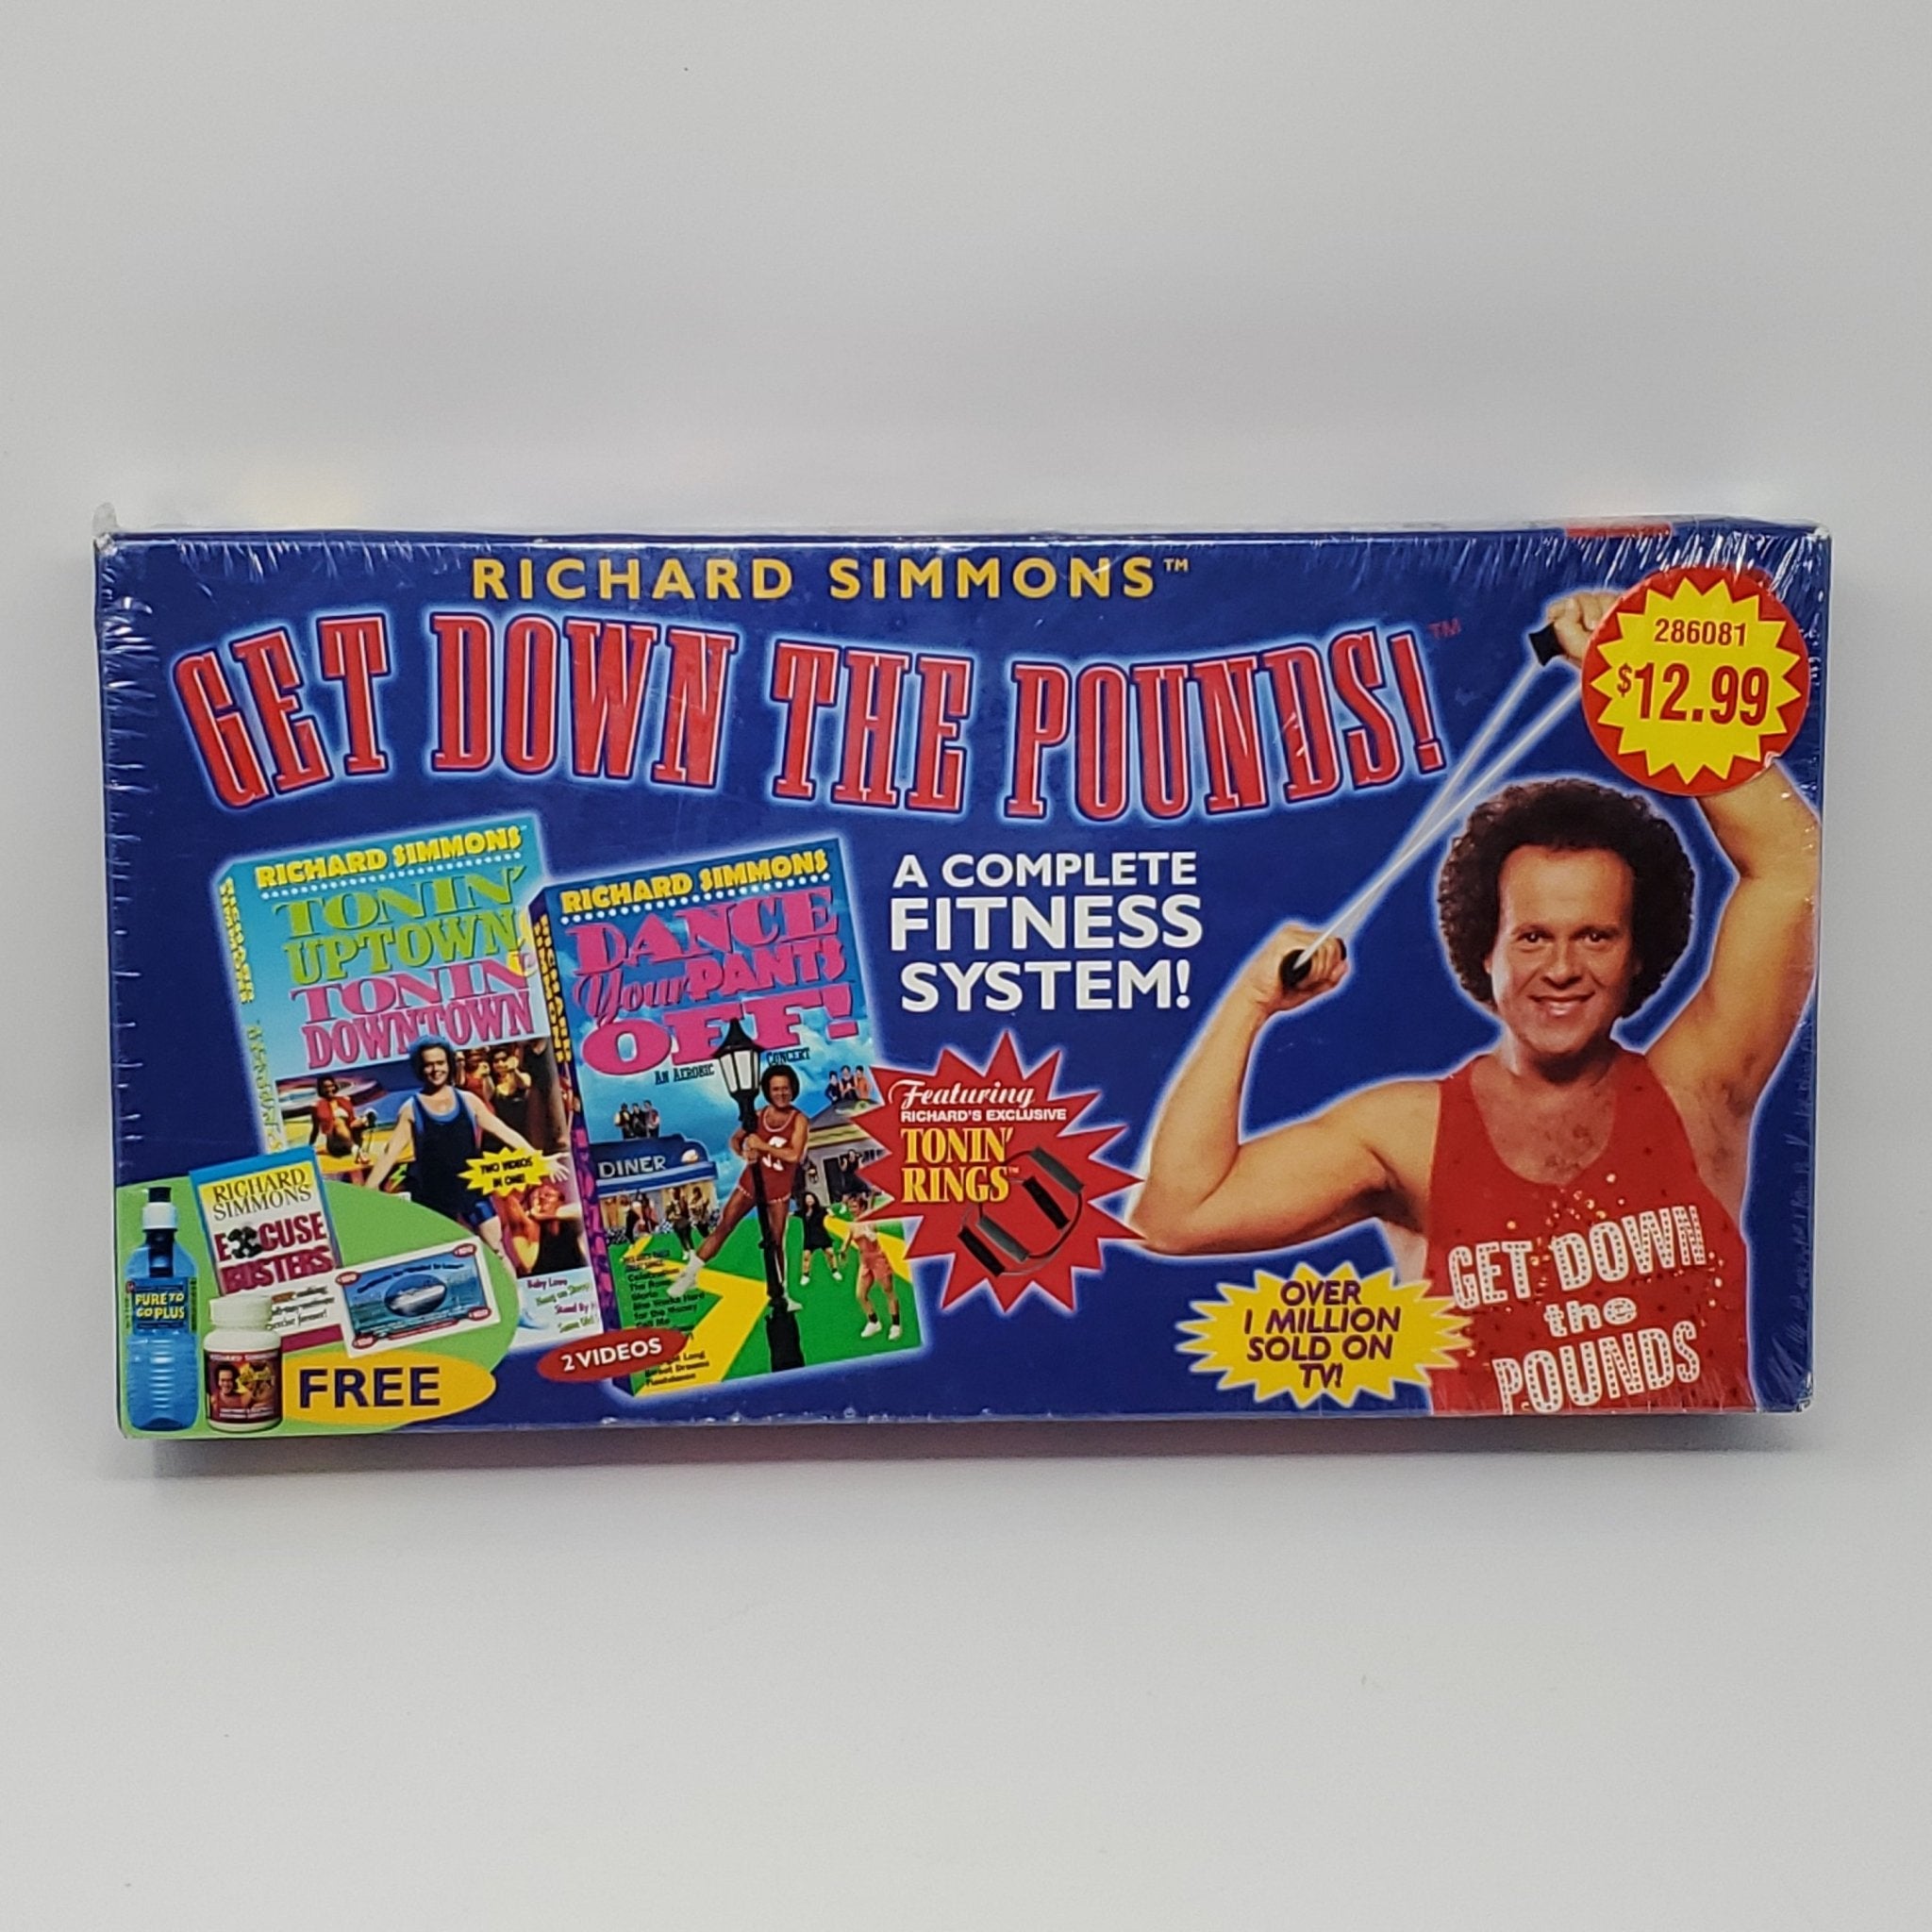 Richard Simmons Get Down The Pounds Fitness System VHS Tape Set - Bargainwizz